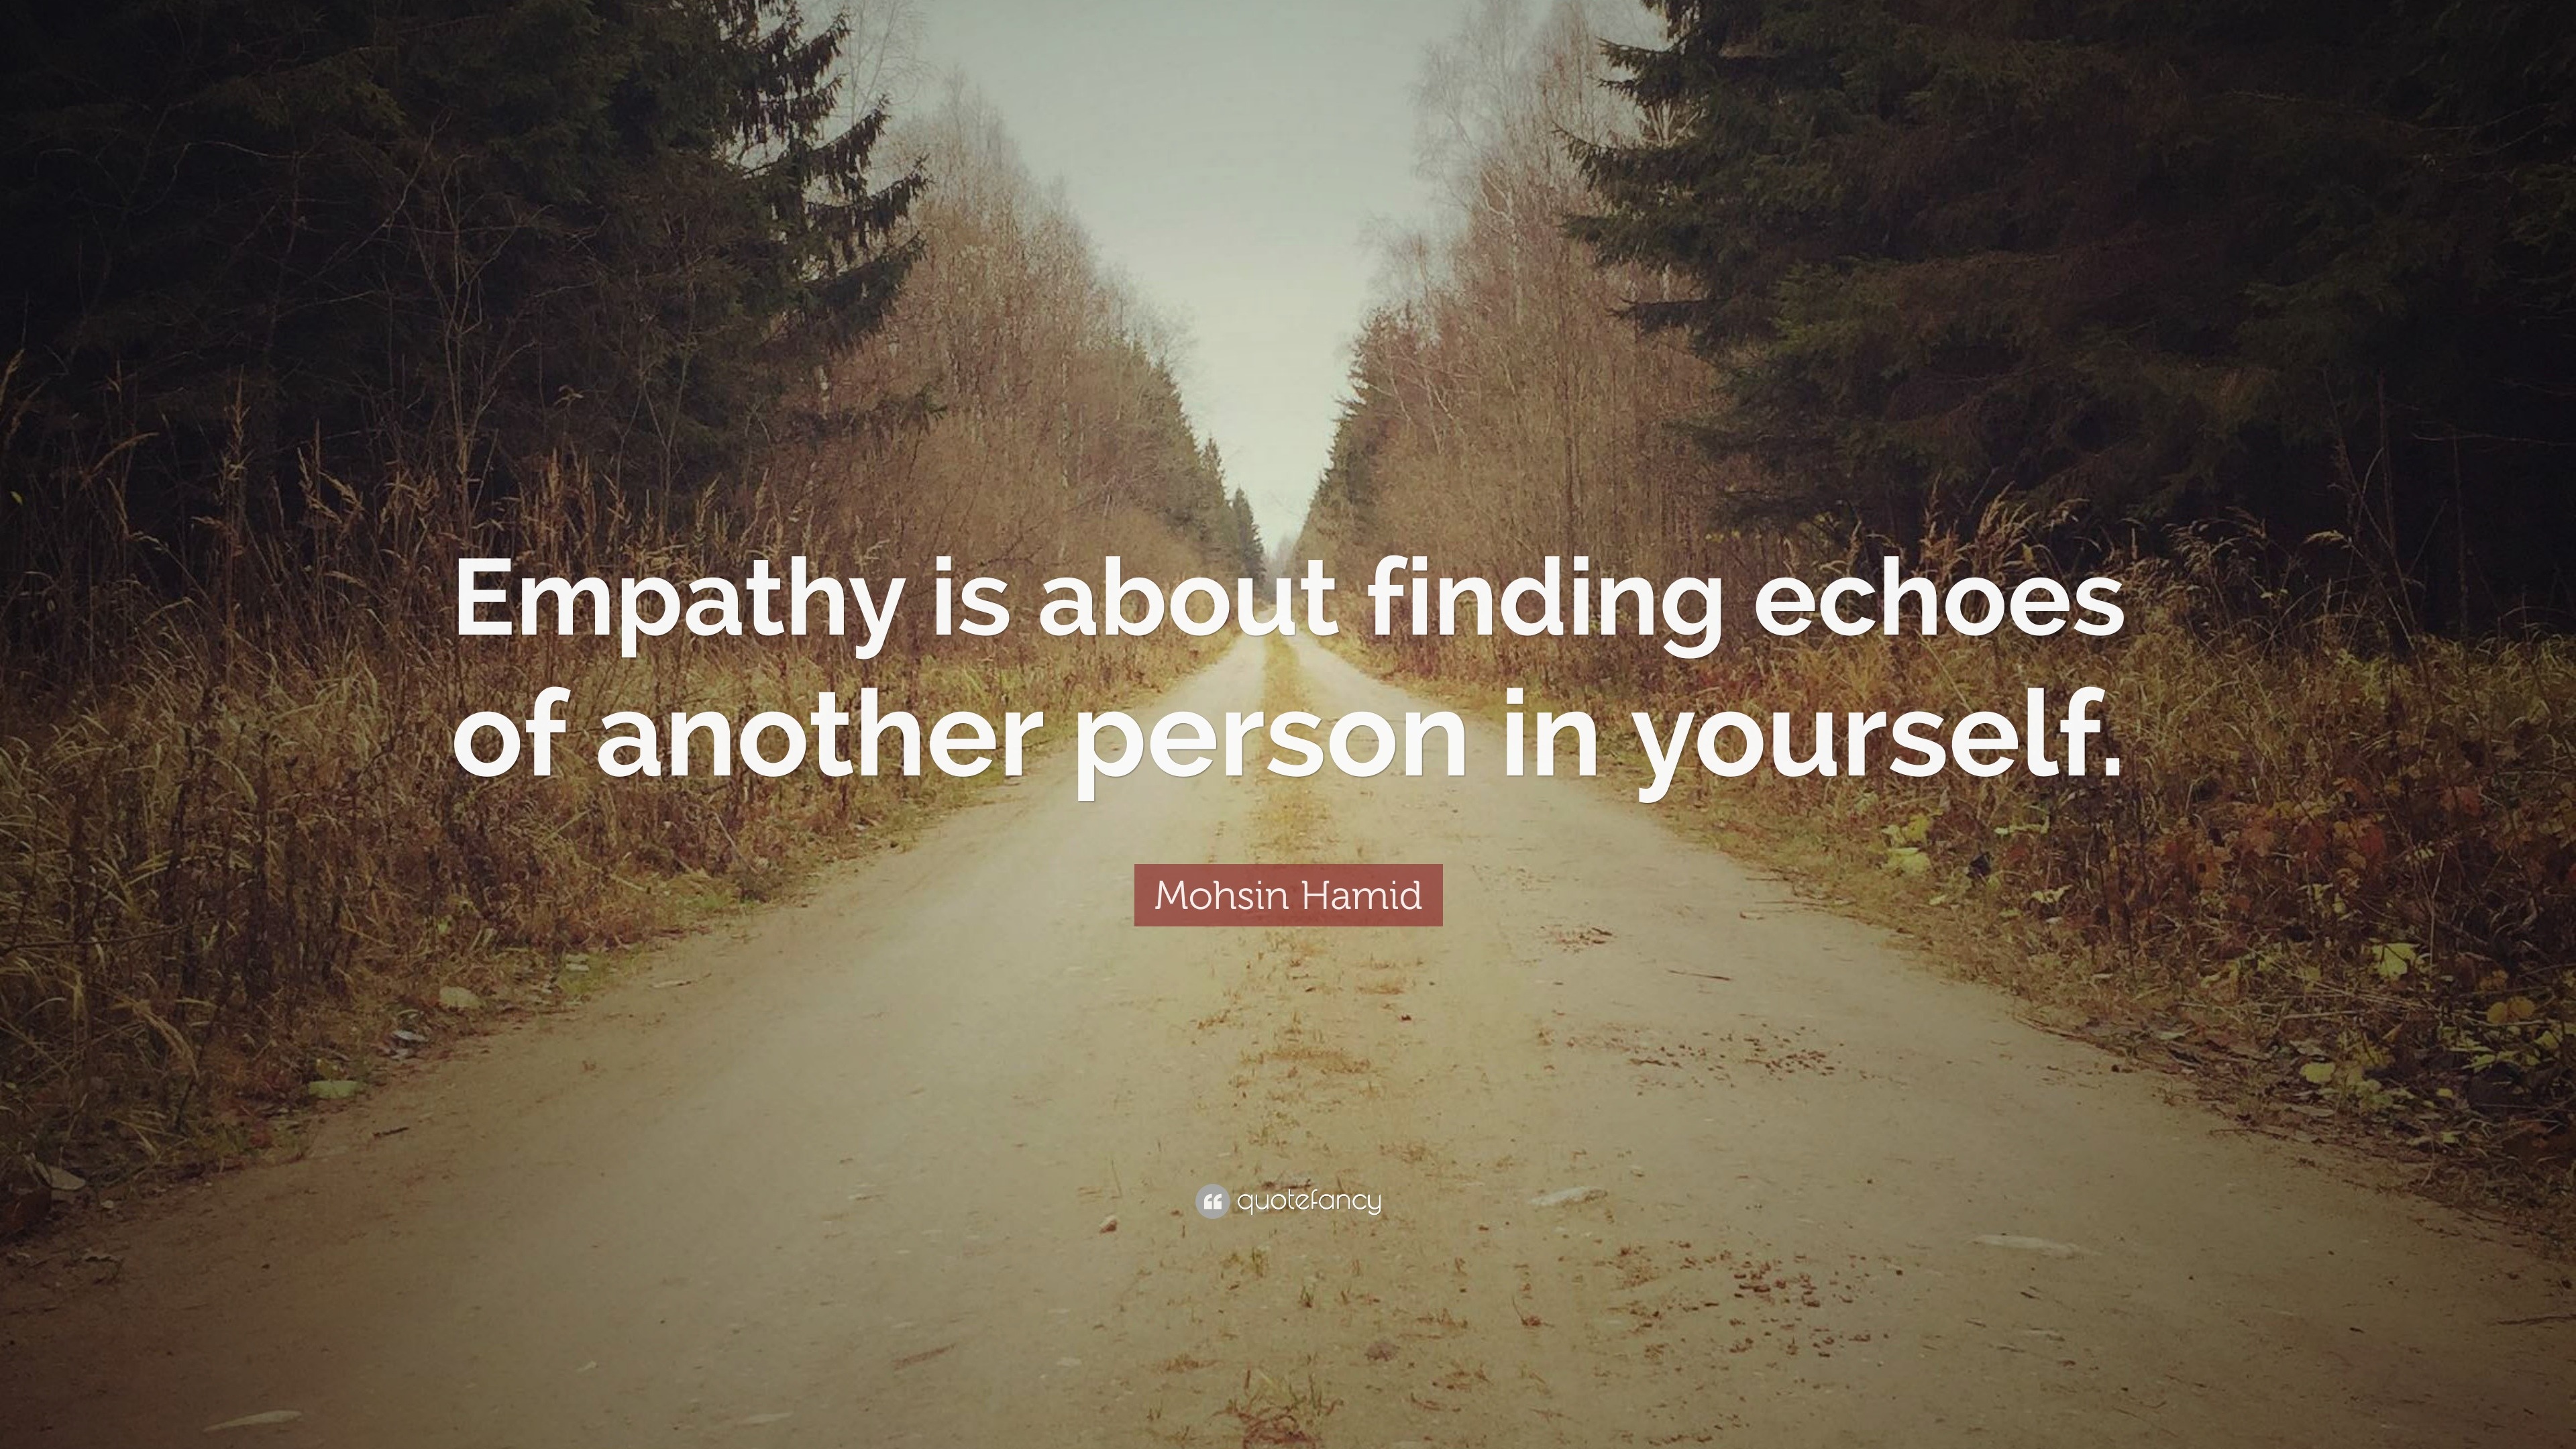 Mohsin Hamid Quote: “Empathy is about finding echoes of another person